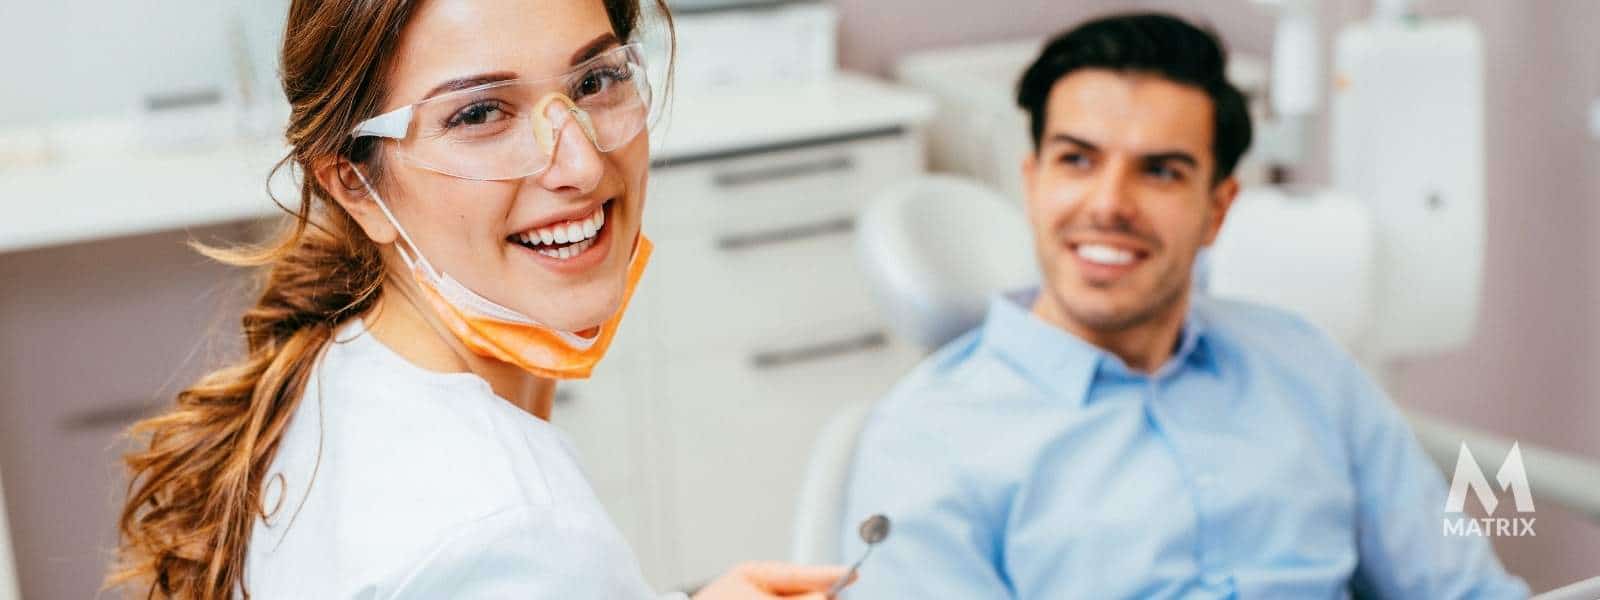 How can dentists benefit from content marketing?